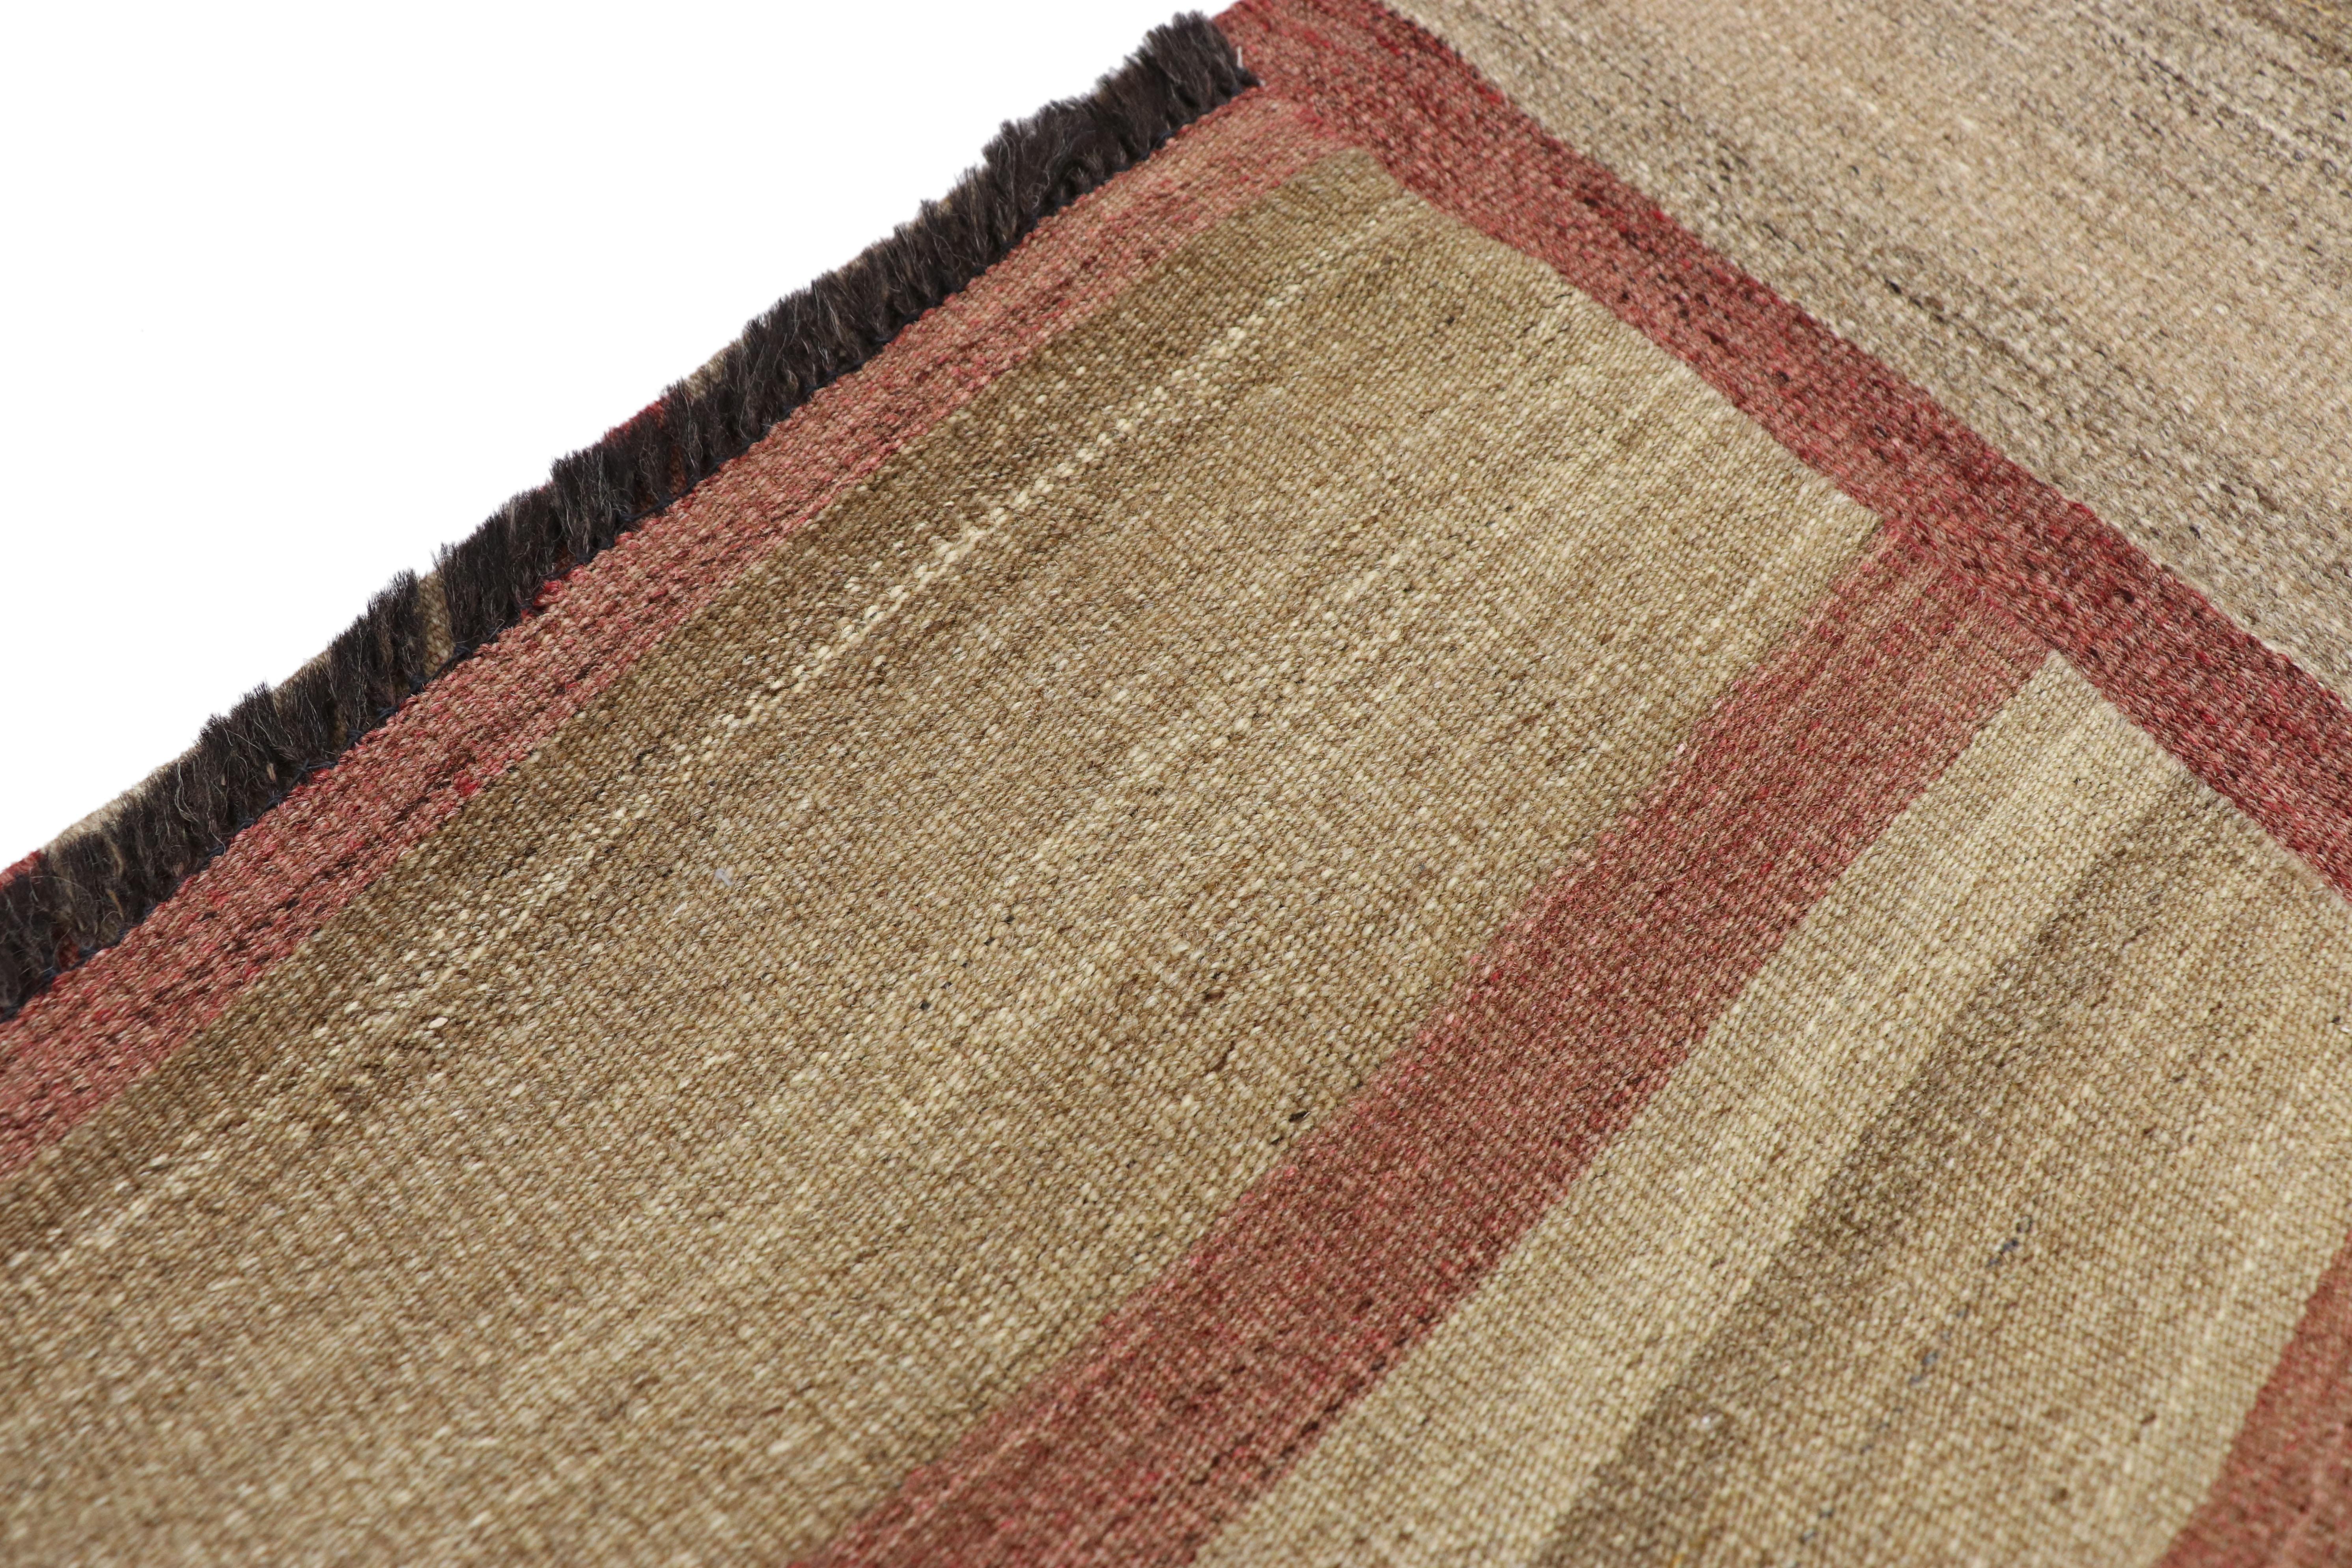 20th Century Vintage Turkish Kilim Accent Rug with Earth Tone Colors, Small Flat-Weave Rug